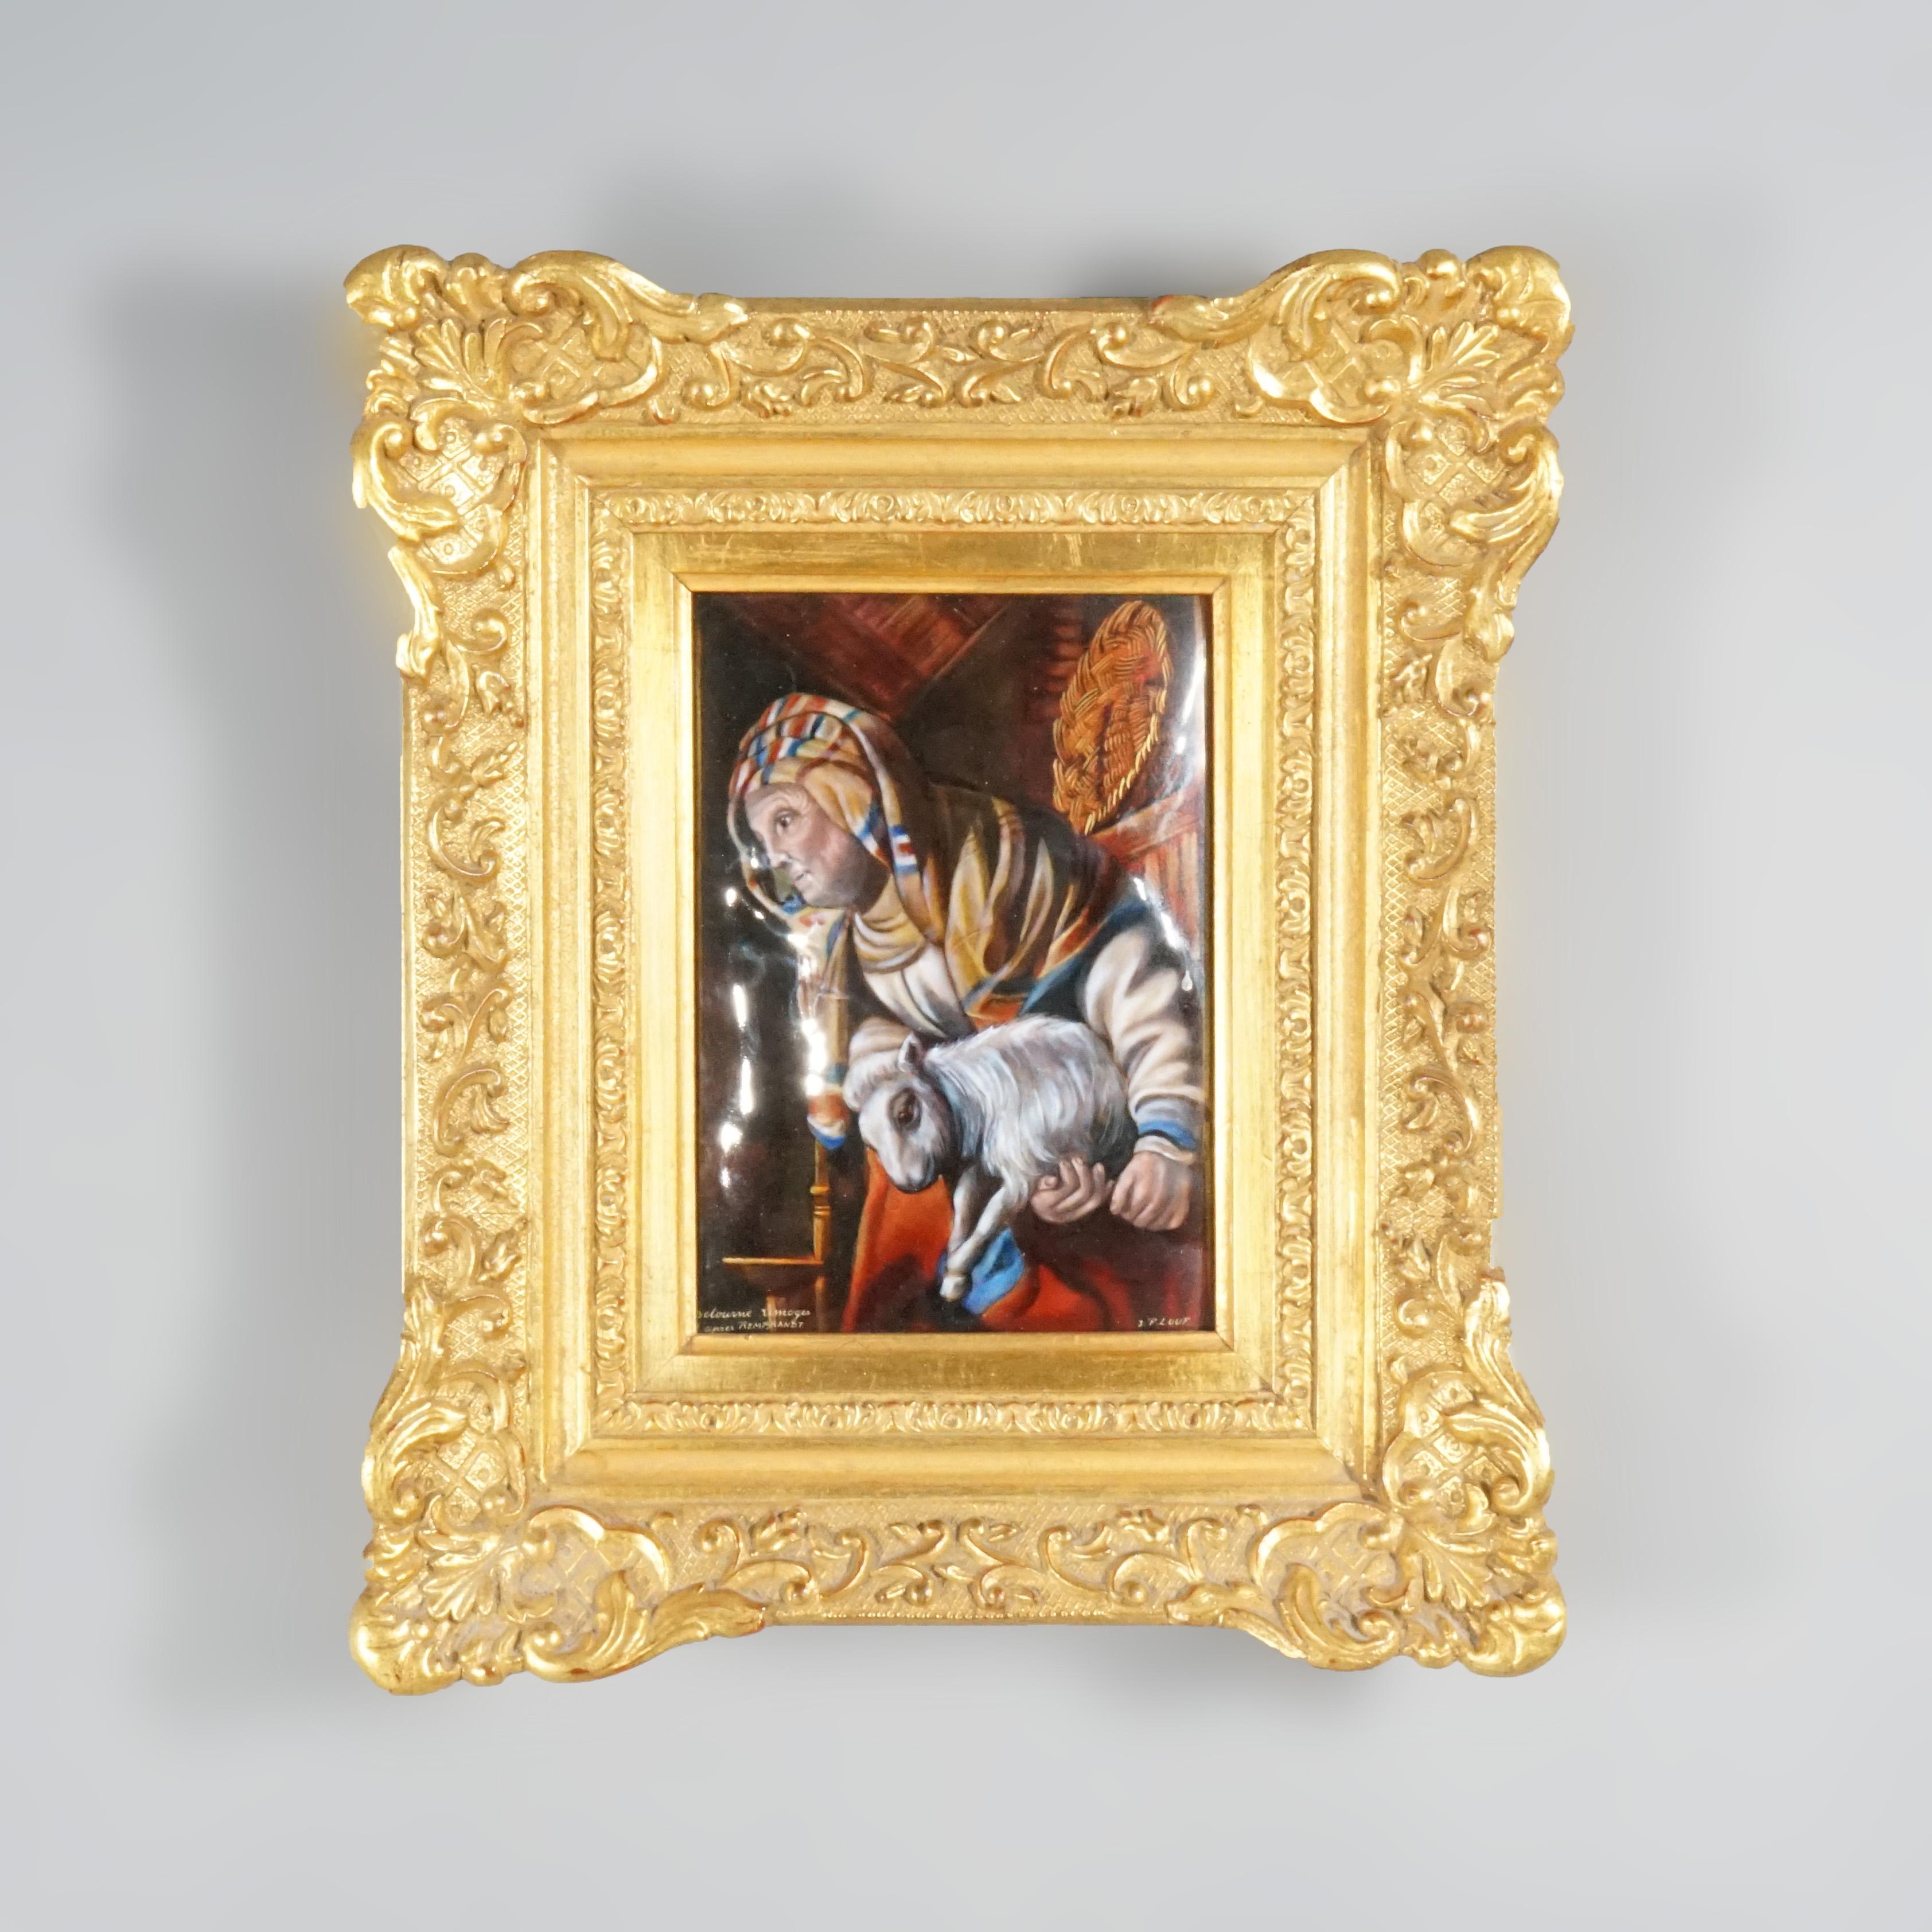 A French Limoges painting after Rembrandt offers enamel on copper scene with man and lamb, signed lower right as photographed, seated in giltwood frame, 20th century.

Measures- 12.75''H x 10.75''W x 2''D; 6.25'' x 8'' sight